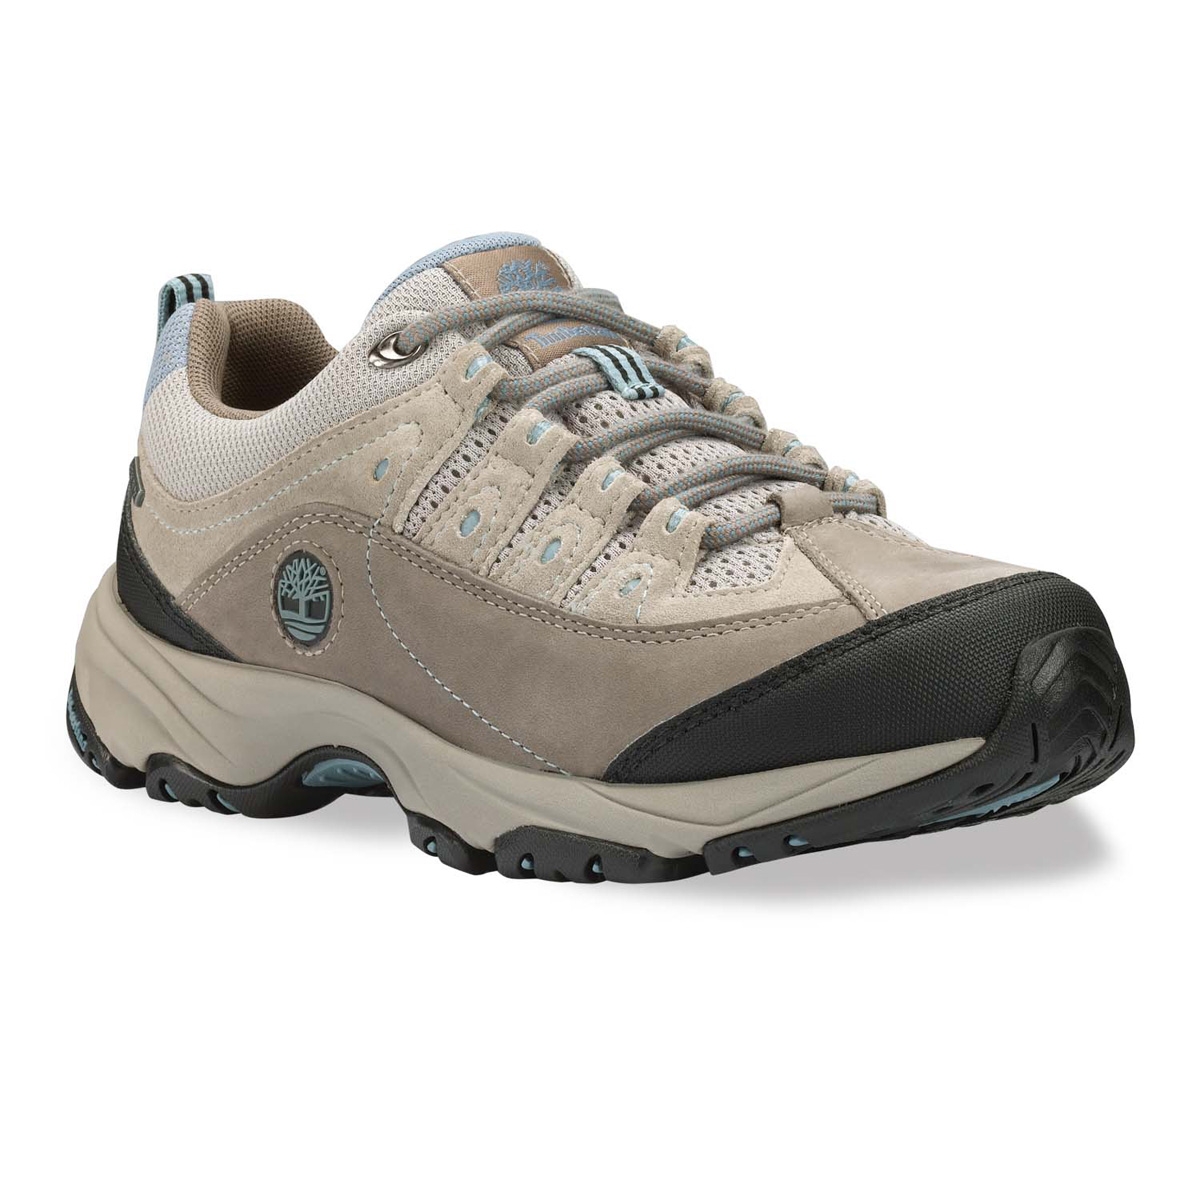 Image of Timberland Ossipee 2.0 Low GTX Walking Shoes (Women's) - Warm ...